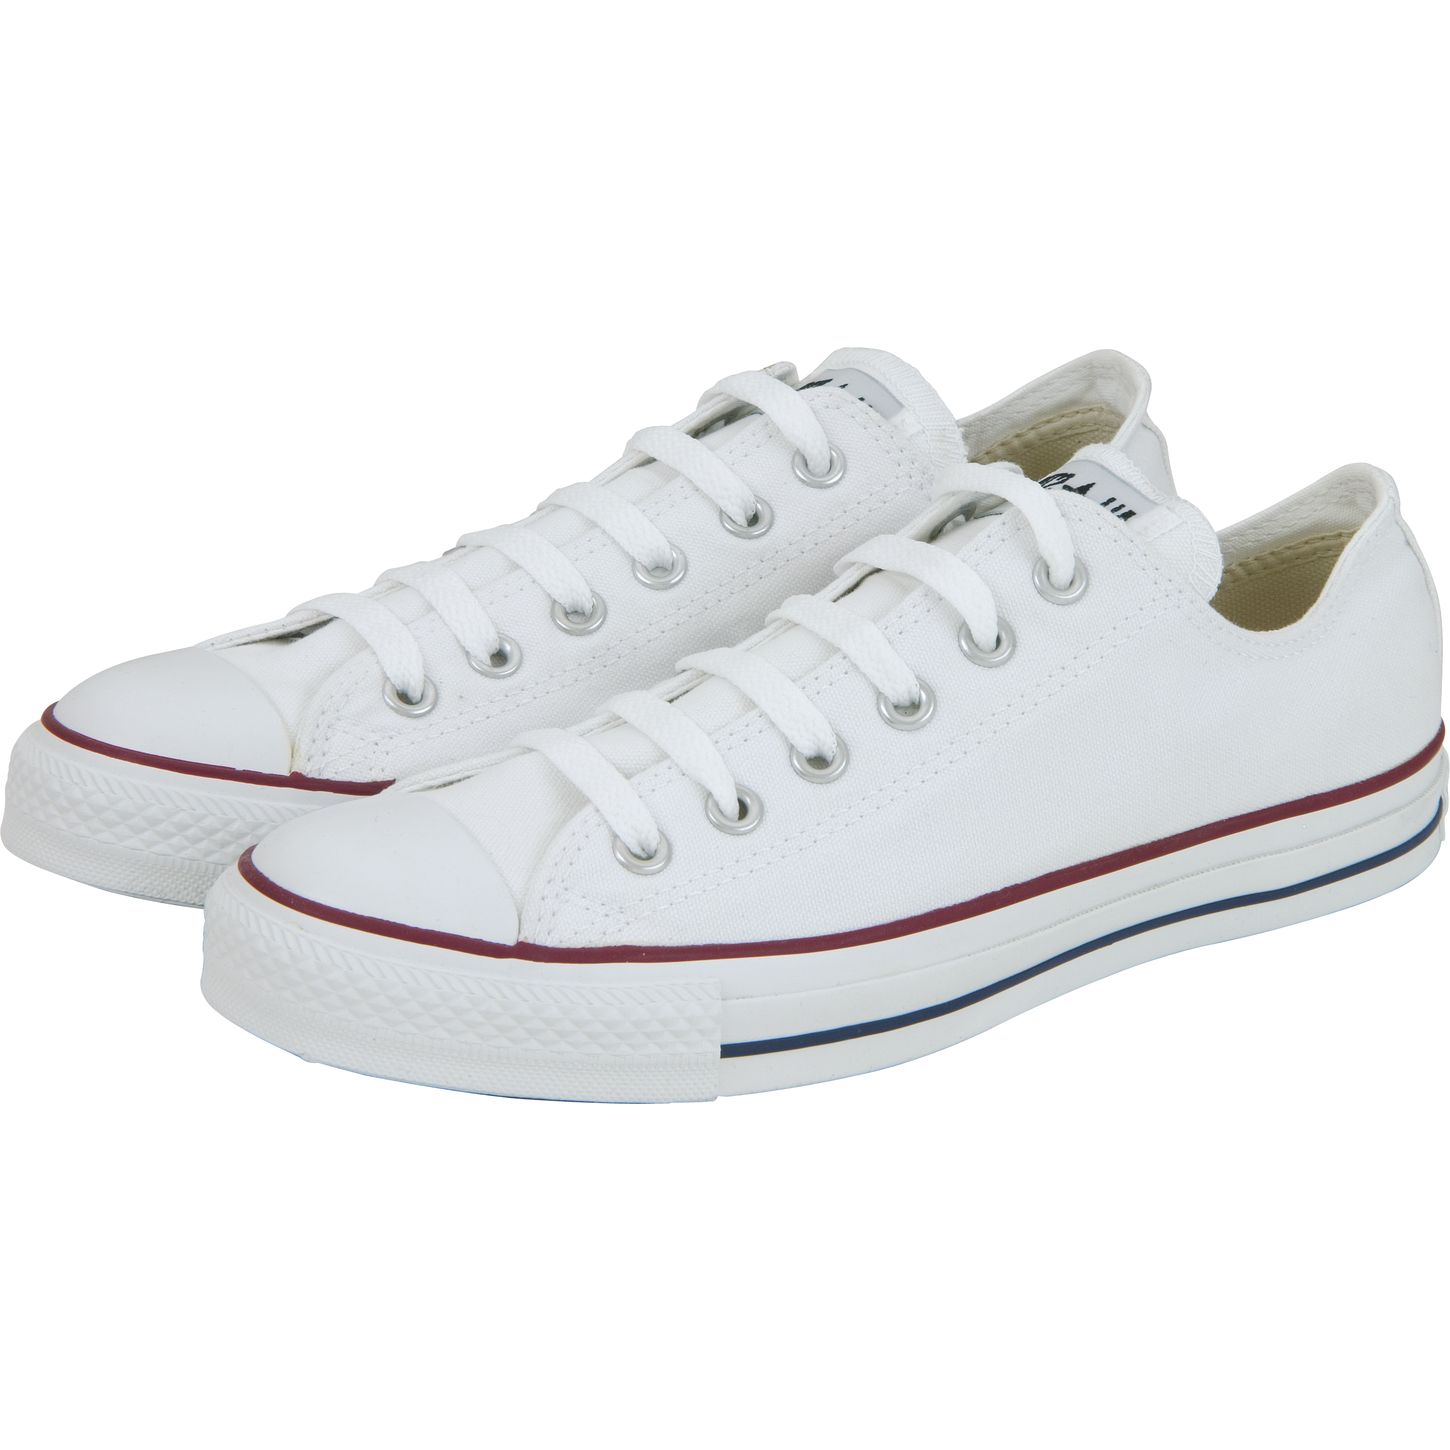 Converse Chuck Taylor All Star Core Oxford Low-Top Optical White